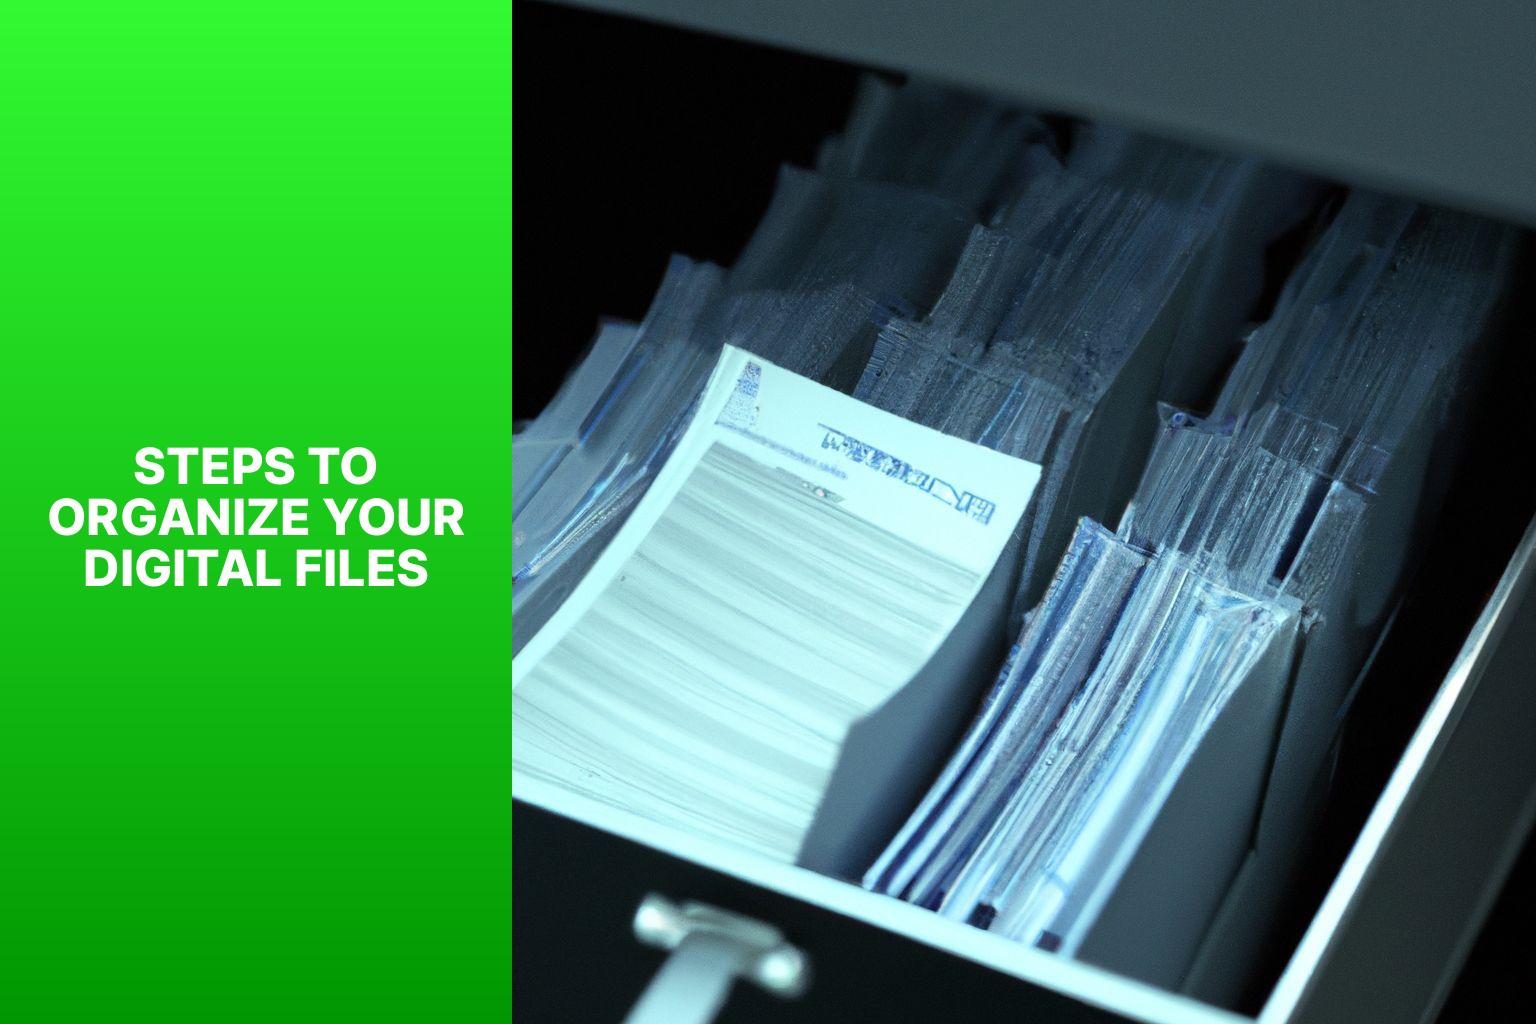 Steps to Organize Your Digital Files - Tutorial: How to Organize Your Digital Files 